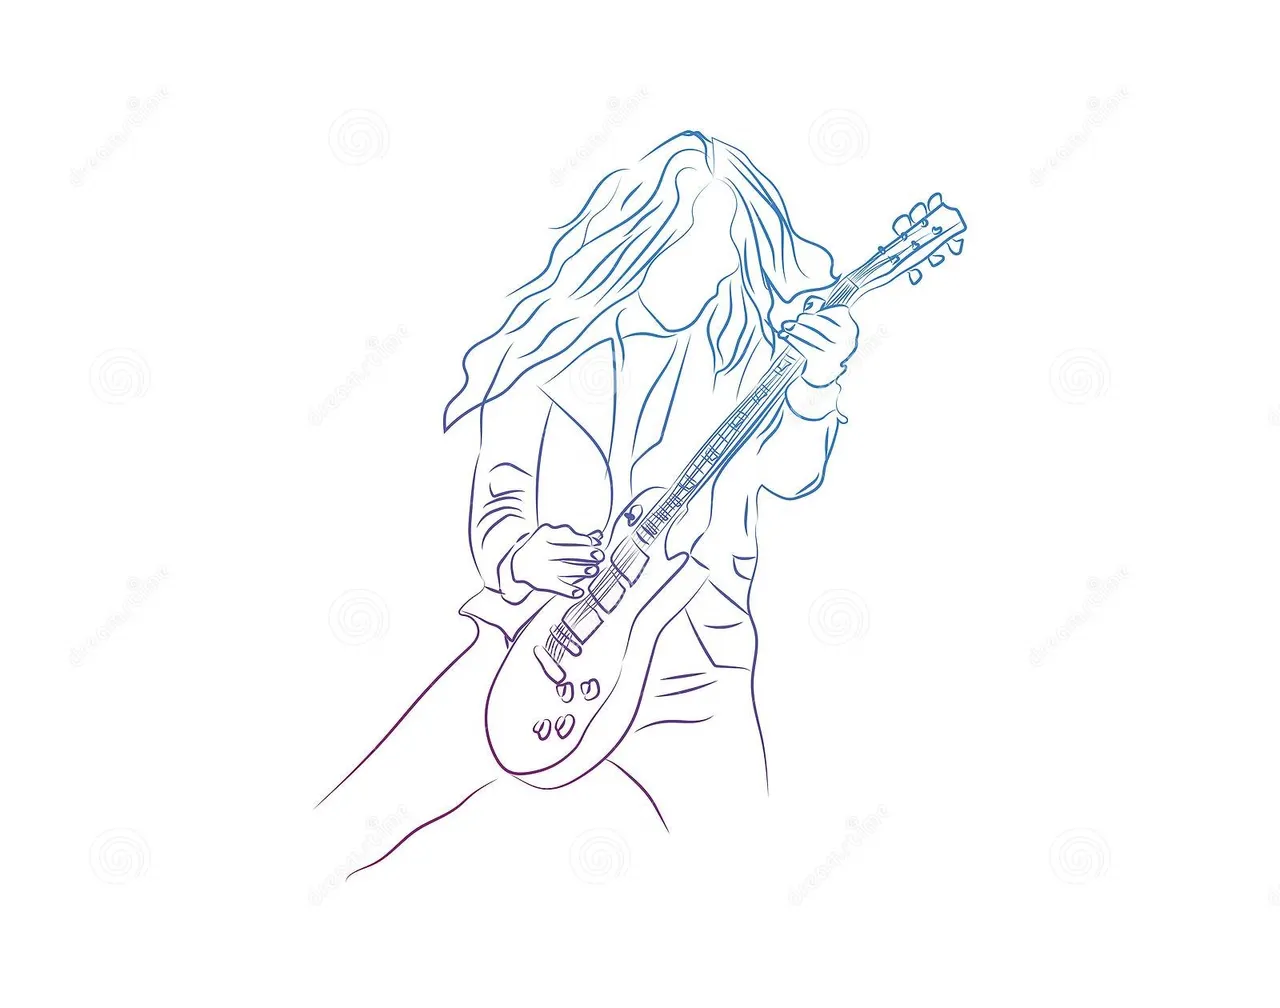 continuous_line_drawing_man_playing_guitar_musician_vector_illustration_153680079.jpg